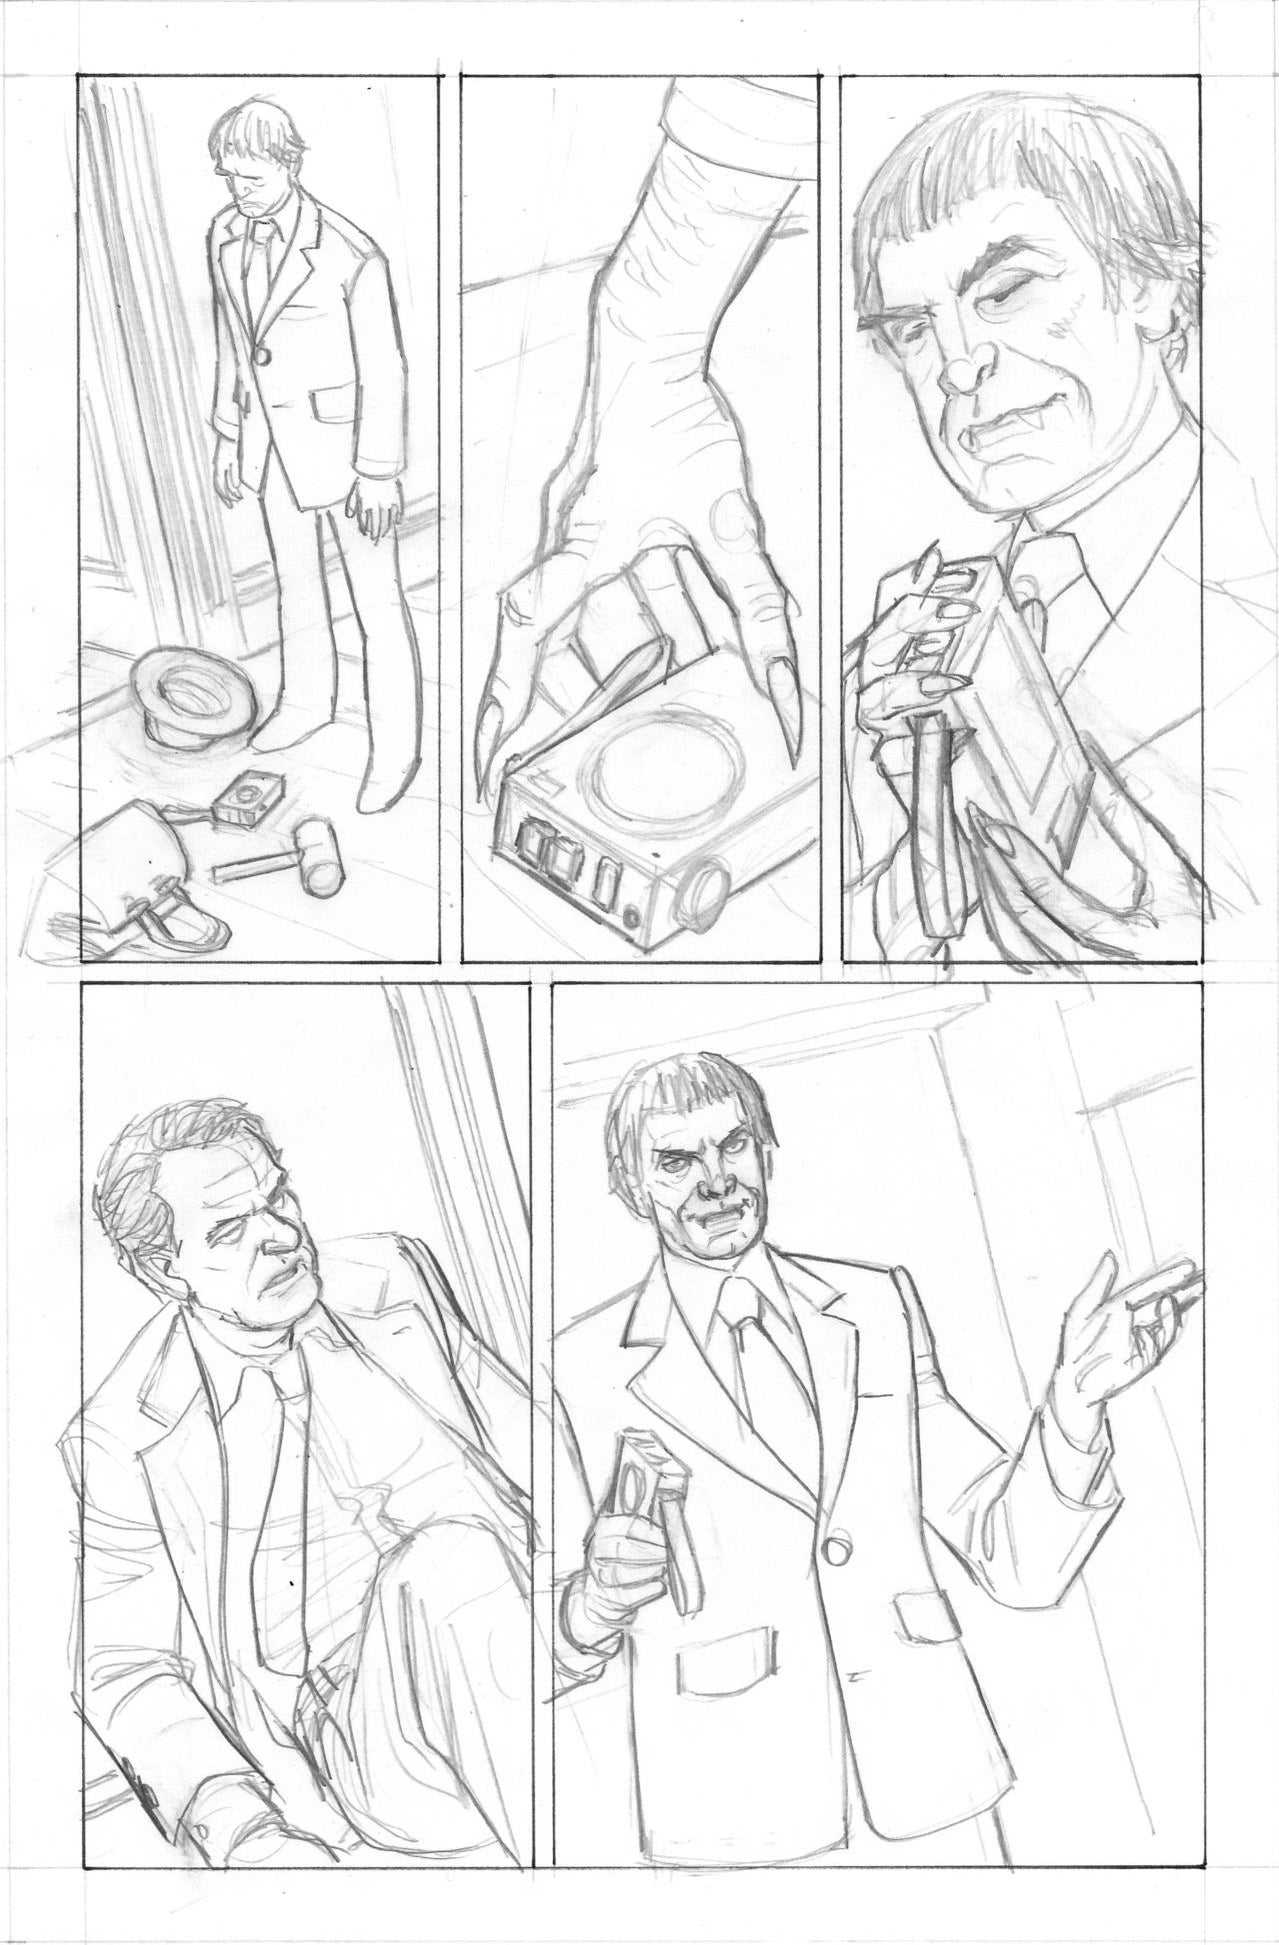 kolchak-interview-with-the-night-stalker-page-5-rough.jpg